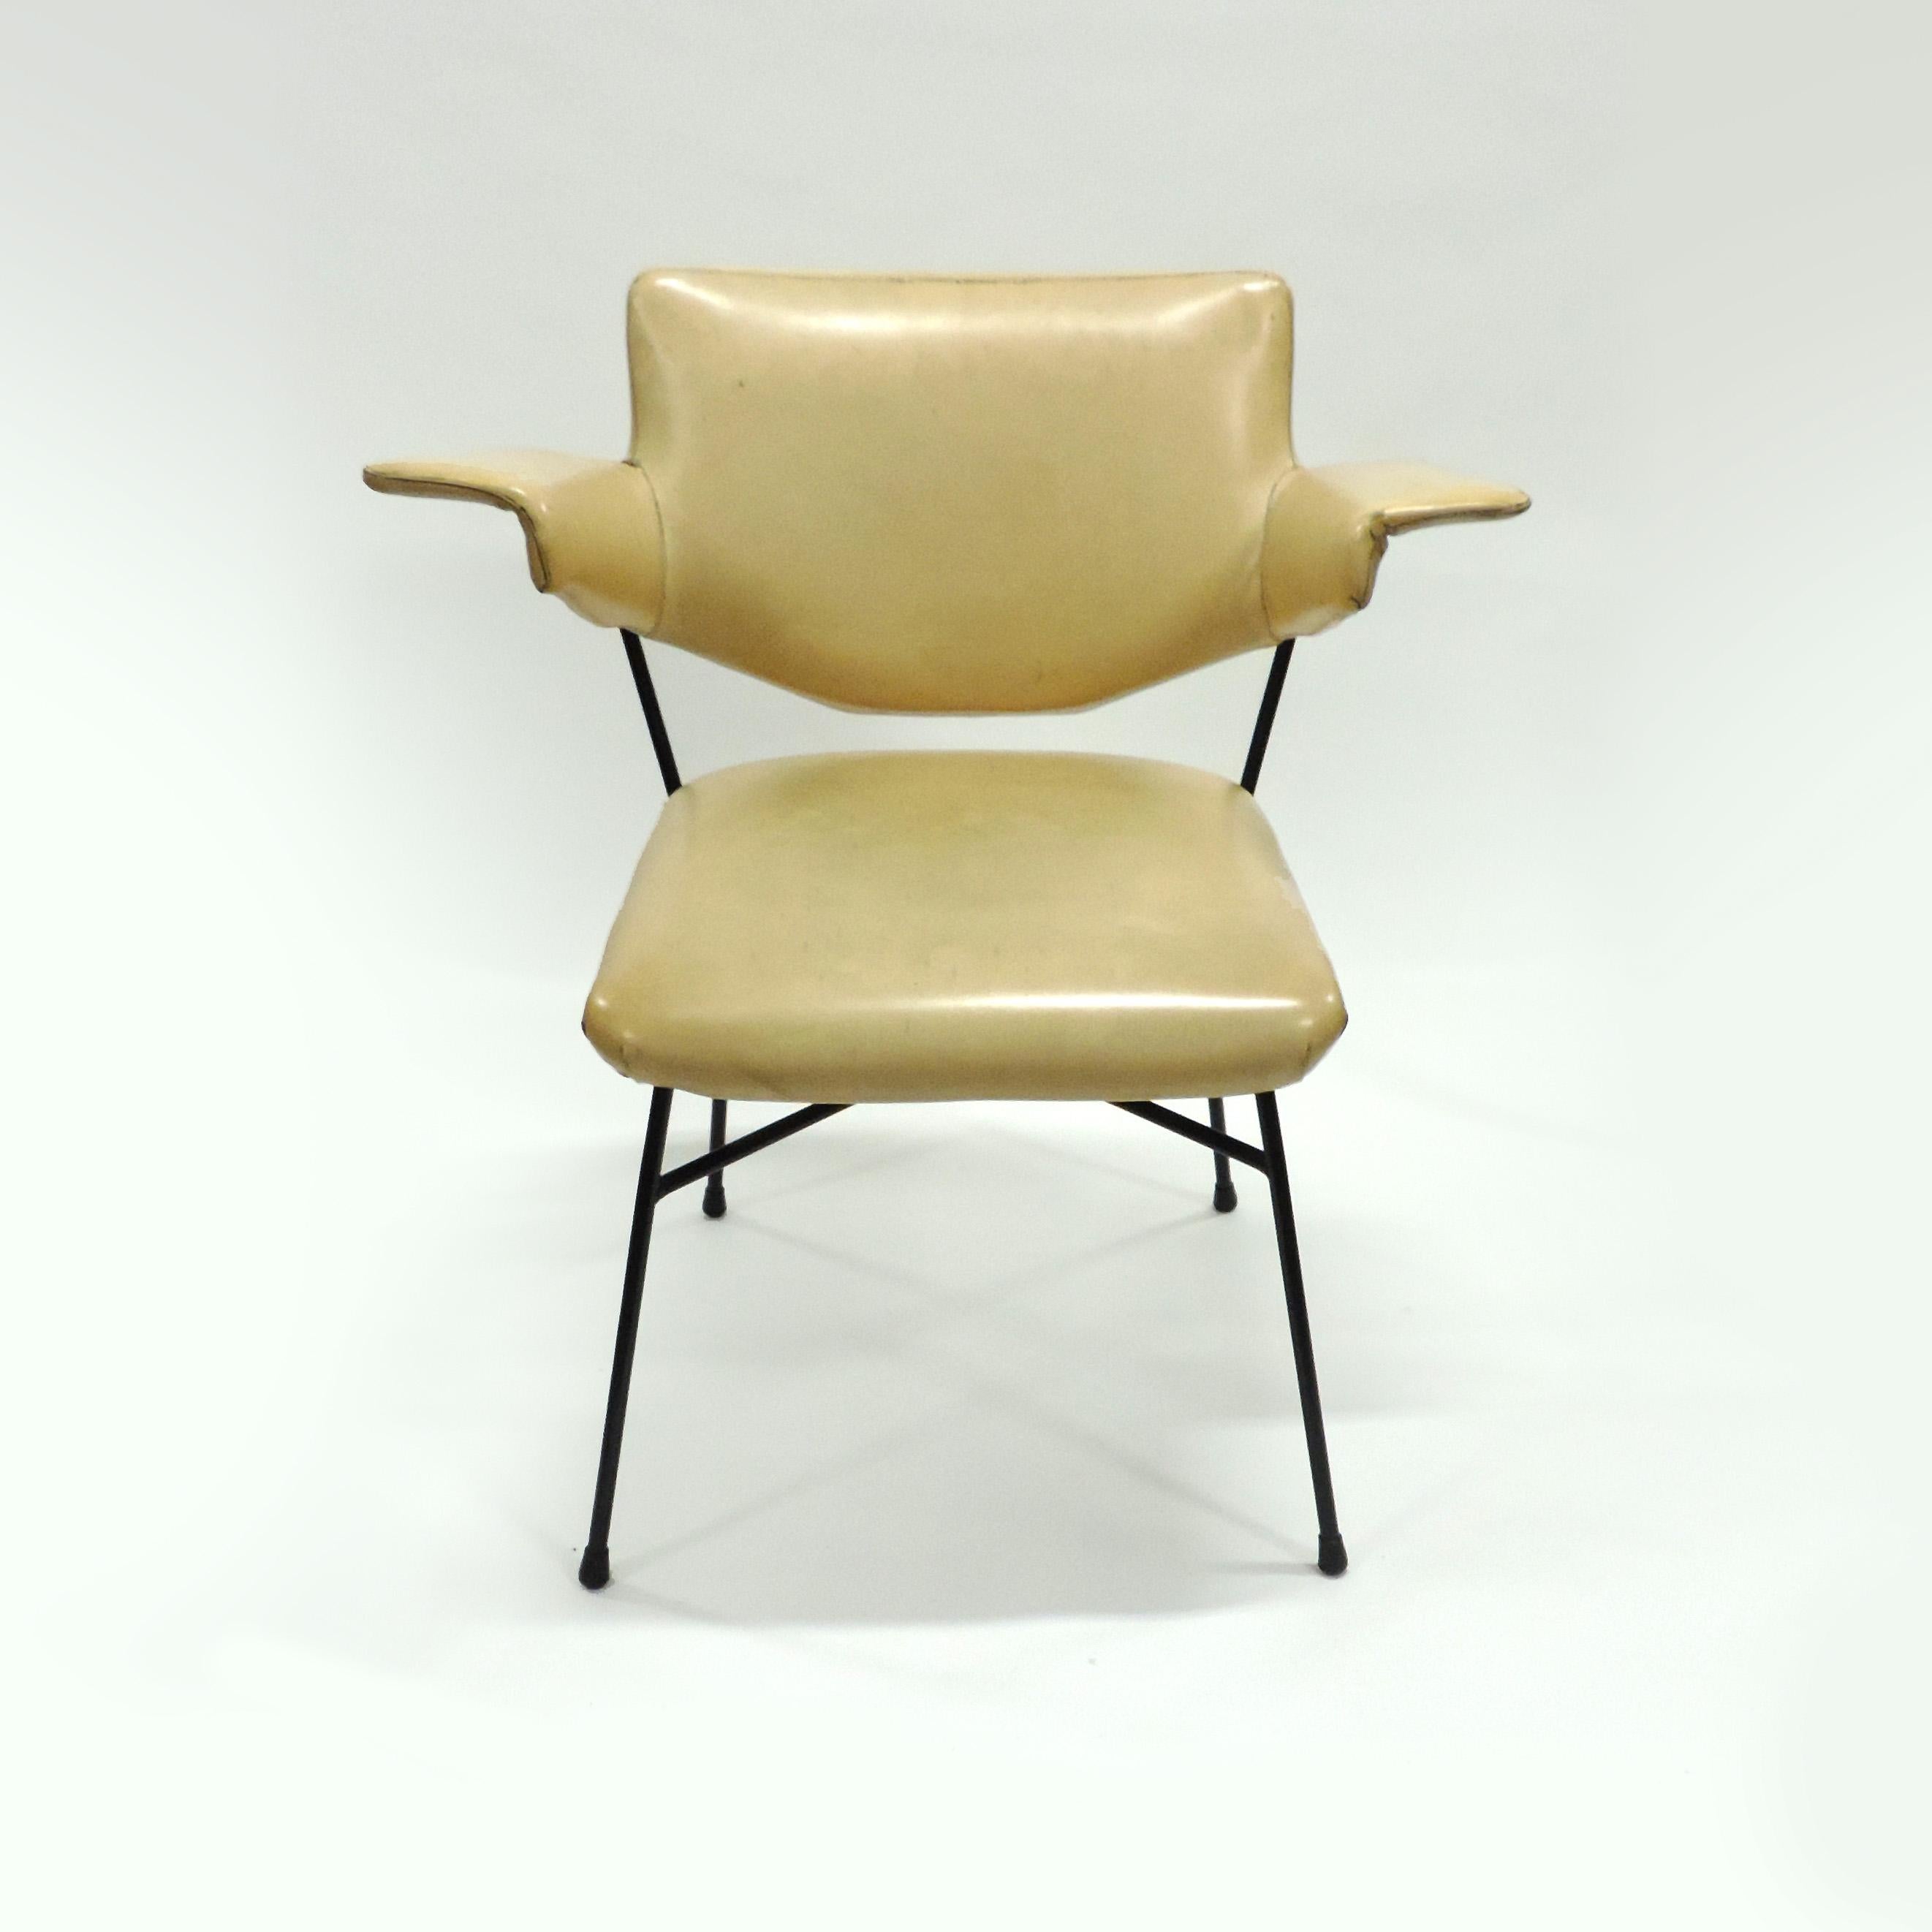 Lacquered Studio BBPR Urania Armchair for Arflex, Italy, 1954 For Sale